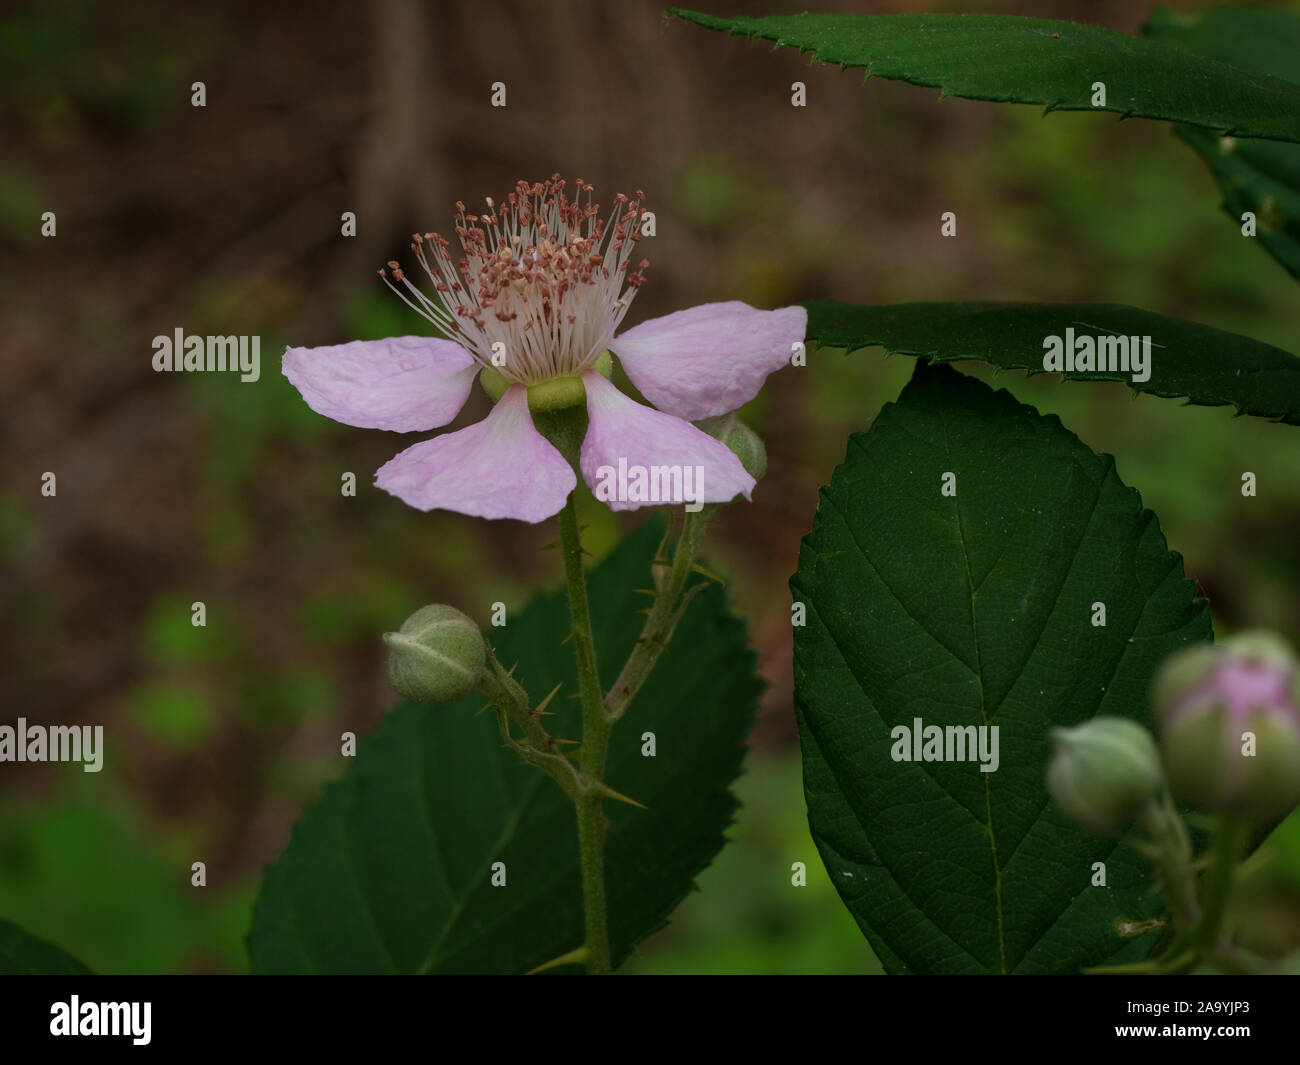 Wild Himalayan blackberry flower blossom close up Stock Photo